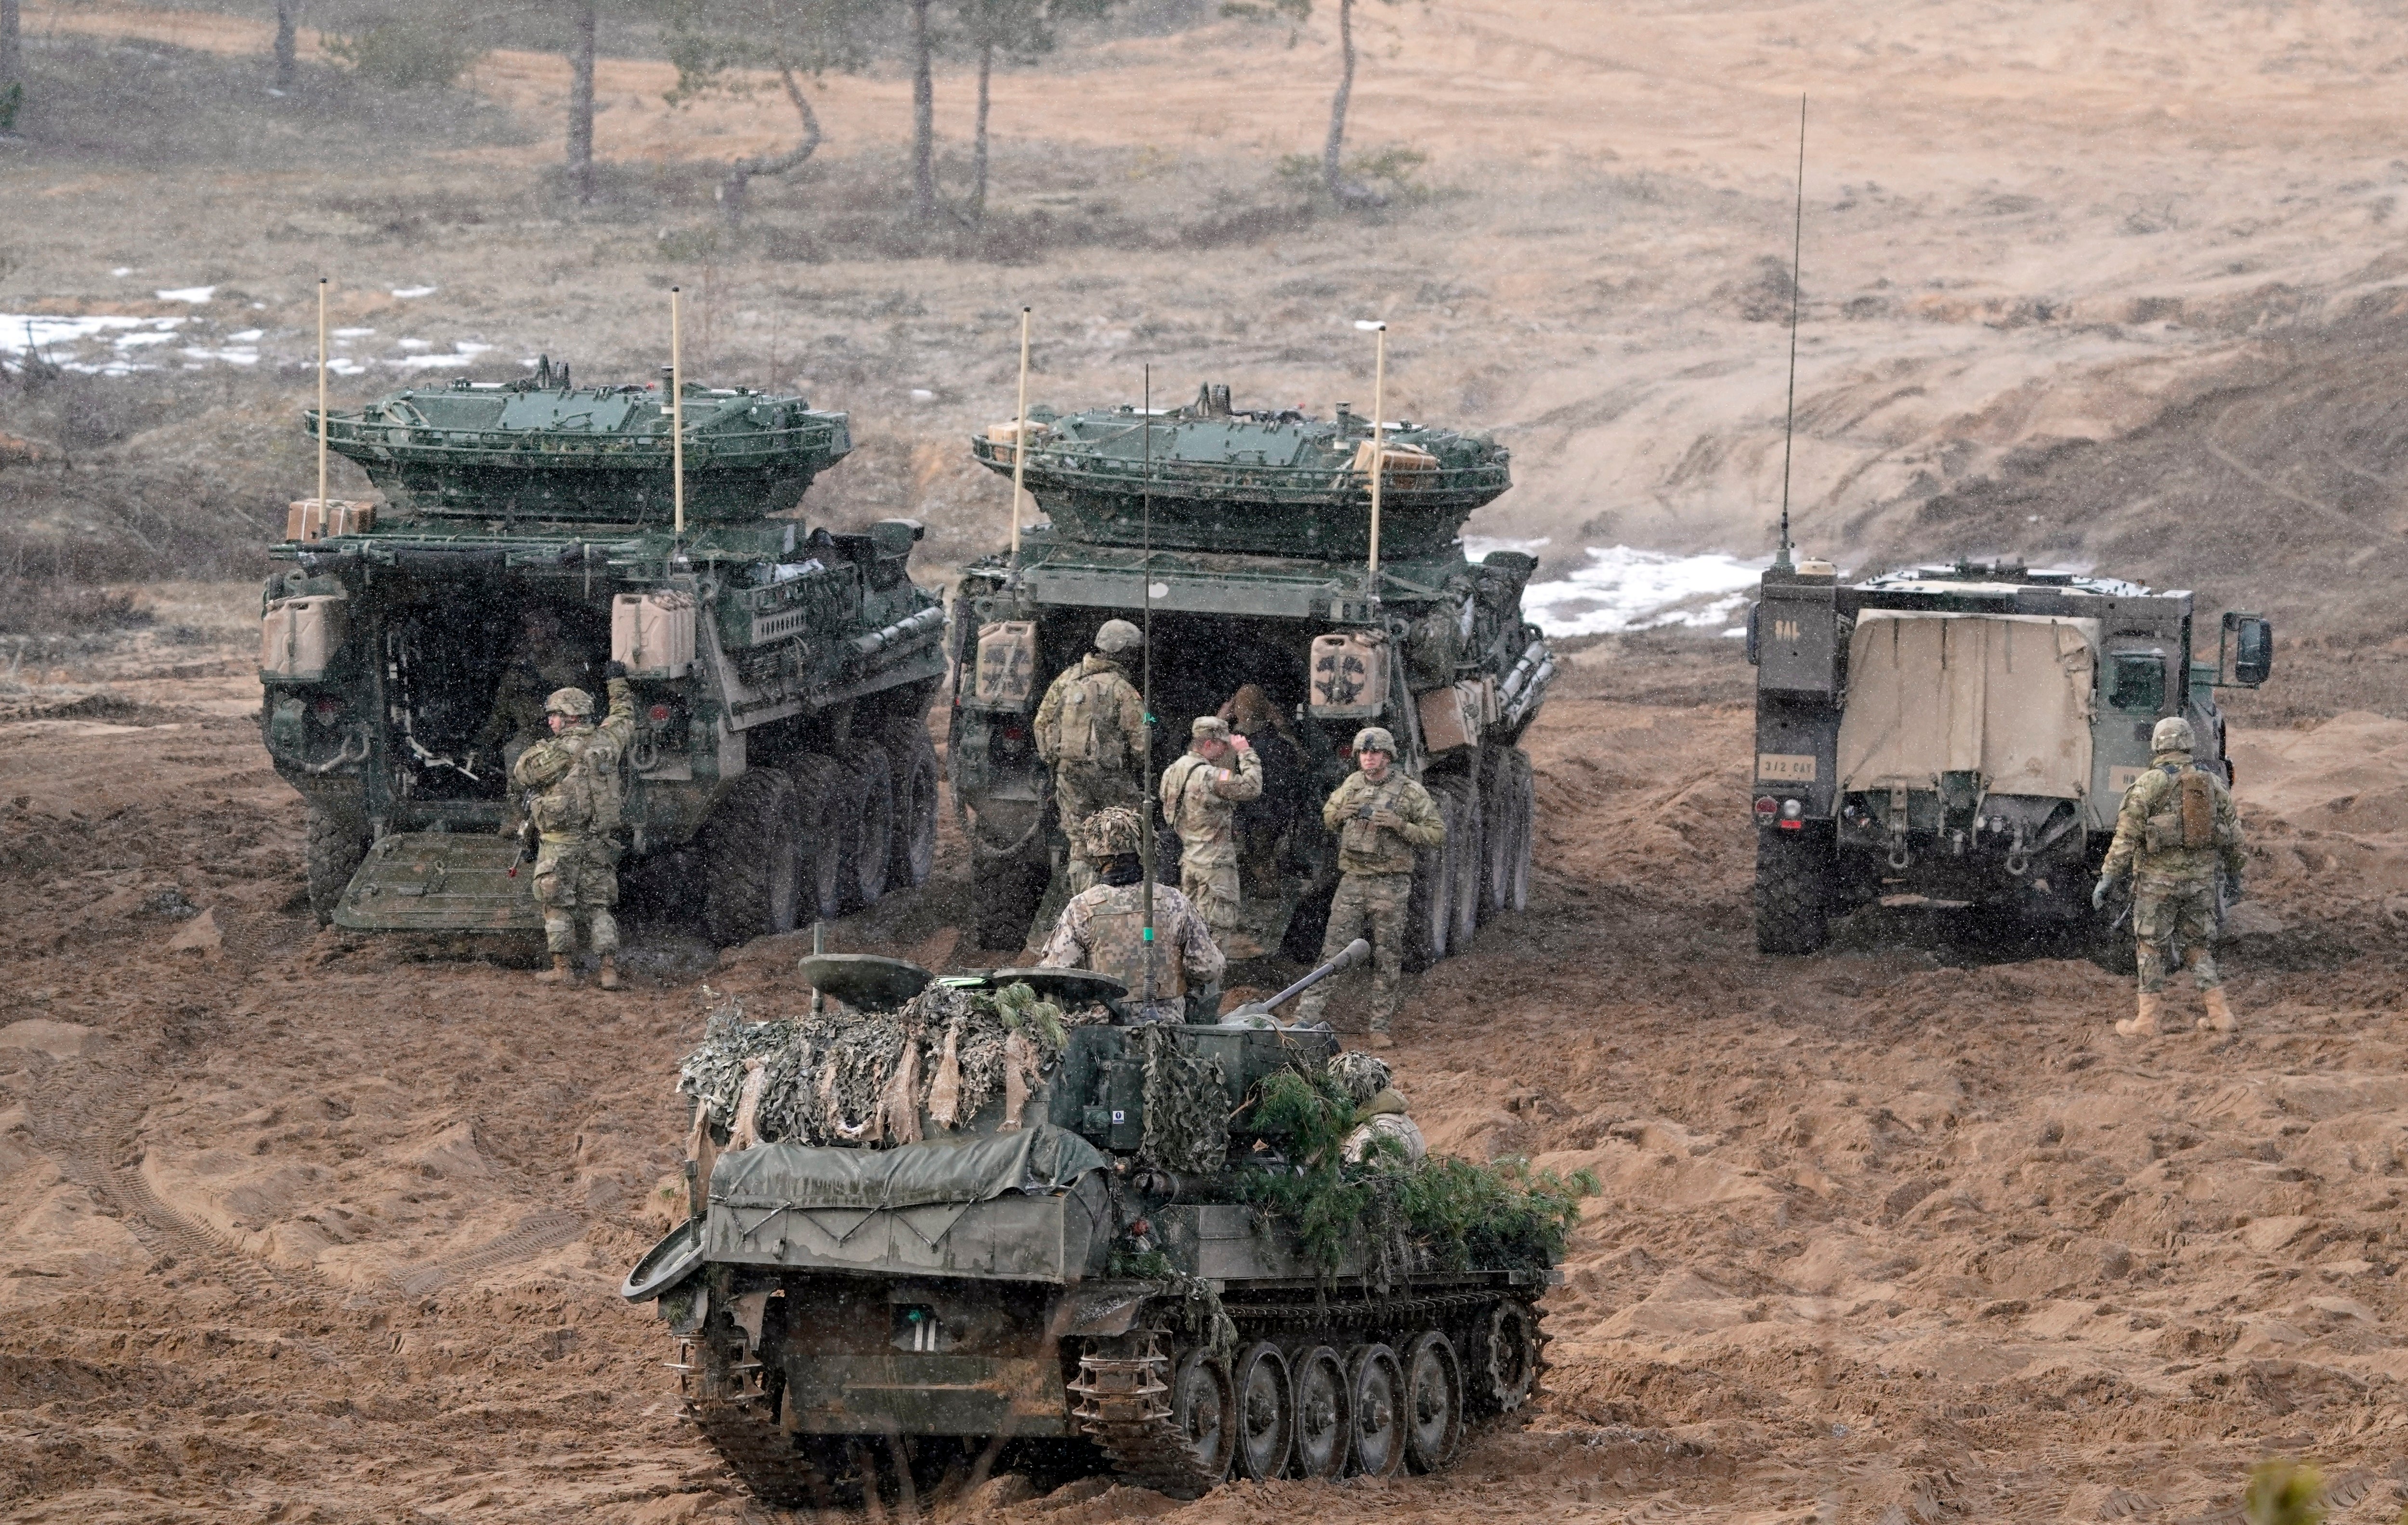 Nato’s battlegroup presence in Latvia is led by Canada